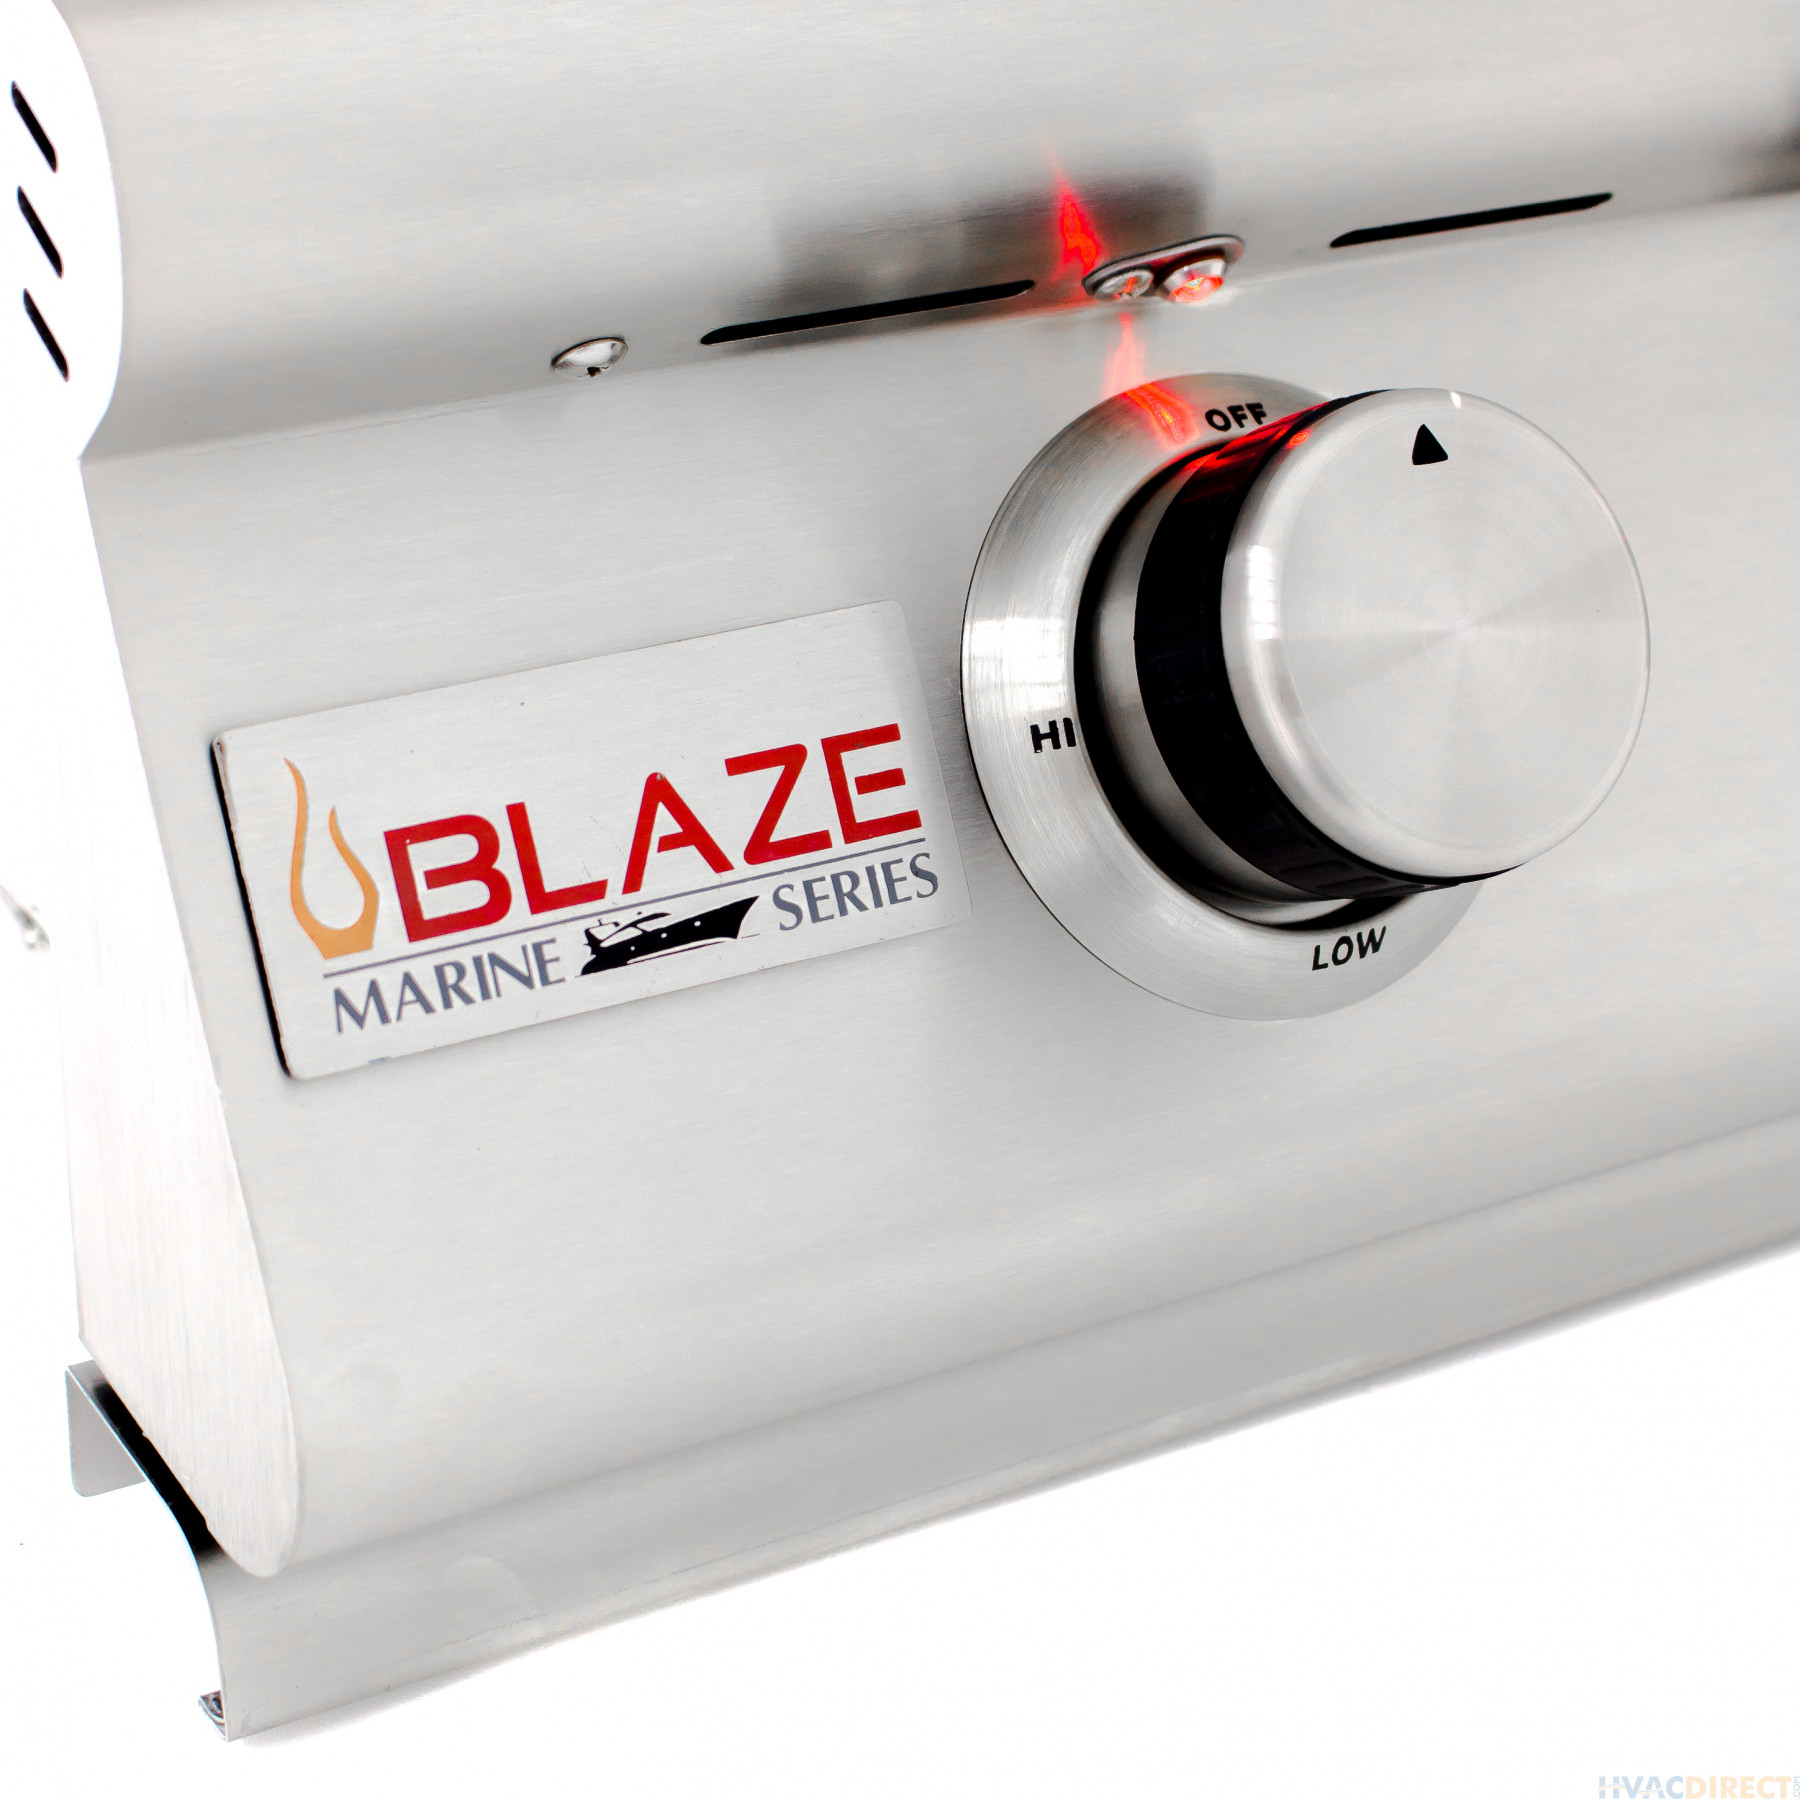 Blaze Gas Grill - LTE- 4 Burner Marine Grade With Lights - open with lights